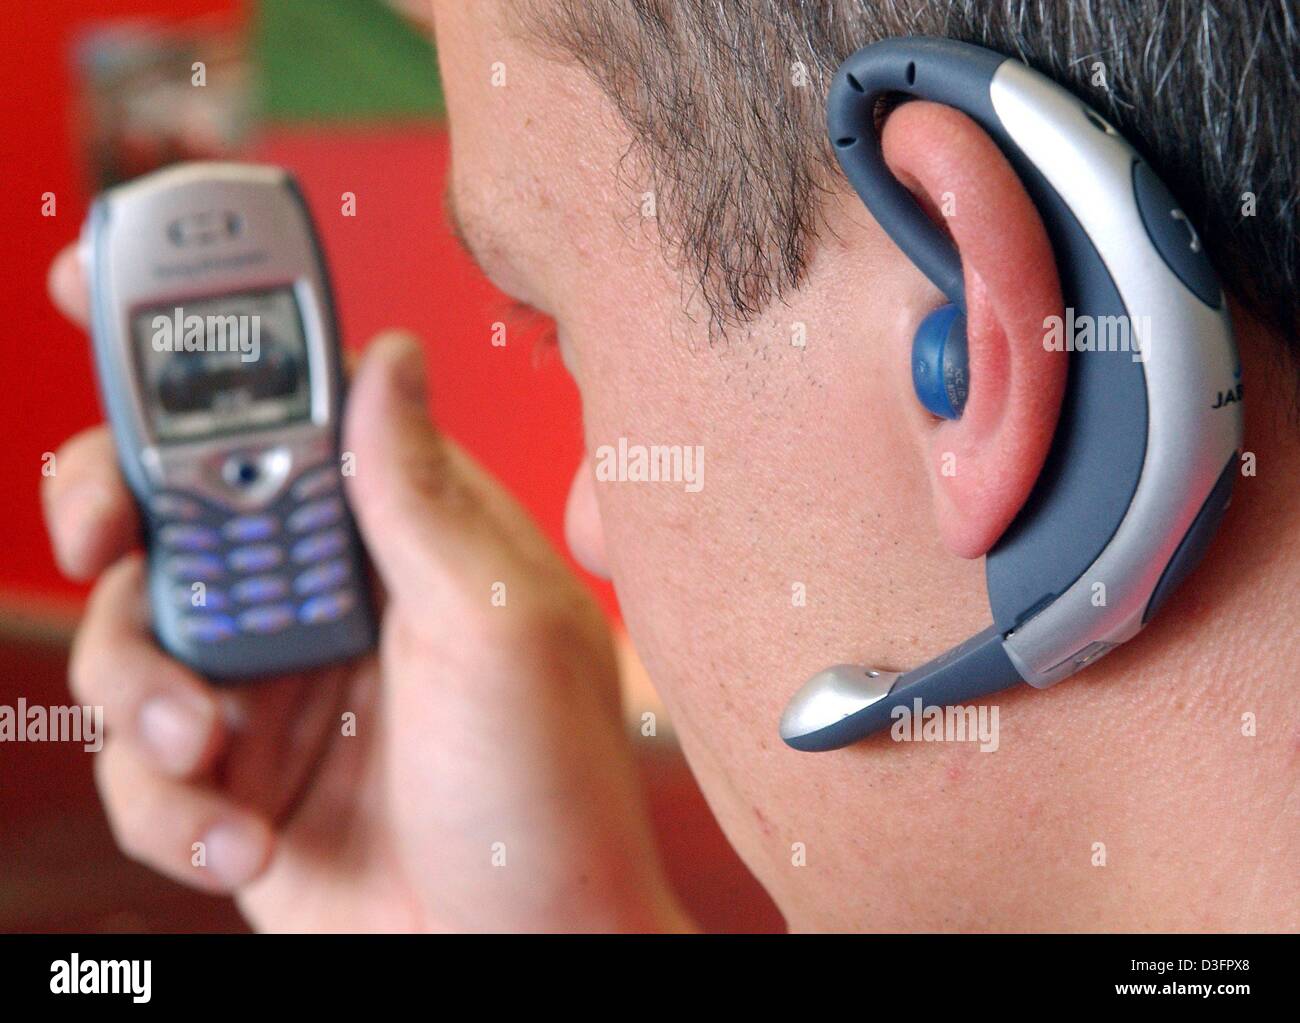 dpa) - A user wears a Bluetooth earplug Jabra BT-200 which can be used for  hands-free phoning with a mobile phone, in Leipzig, Germany, 6 April 2003.  The Bluetooth wireless connection works